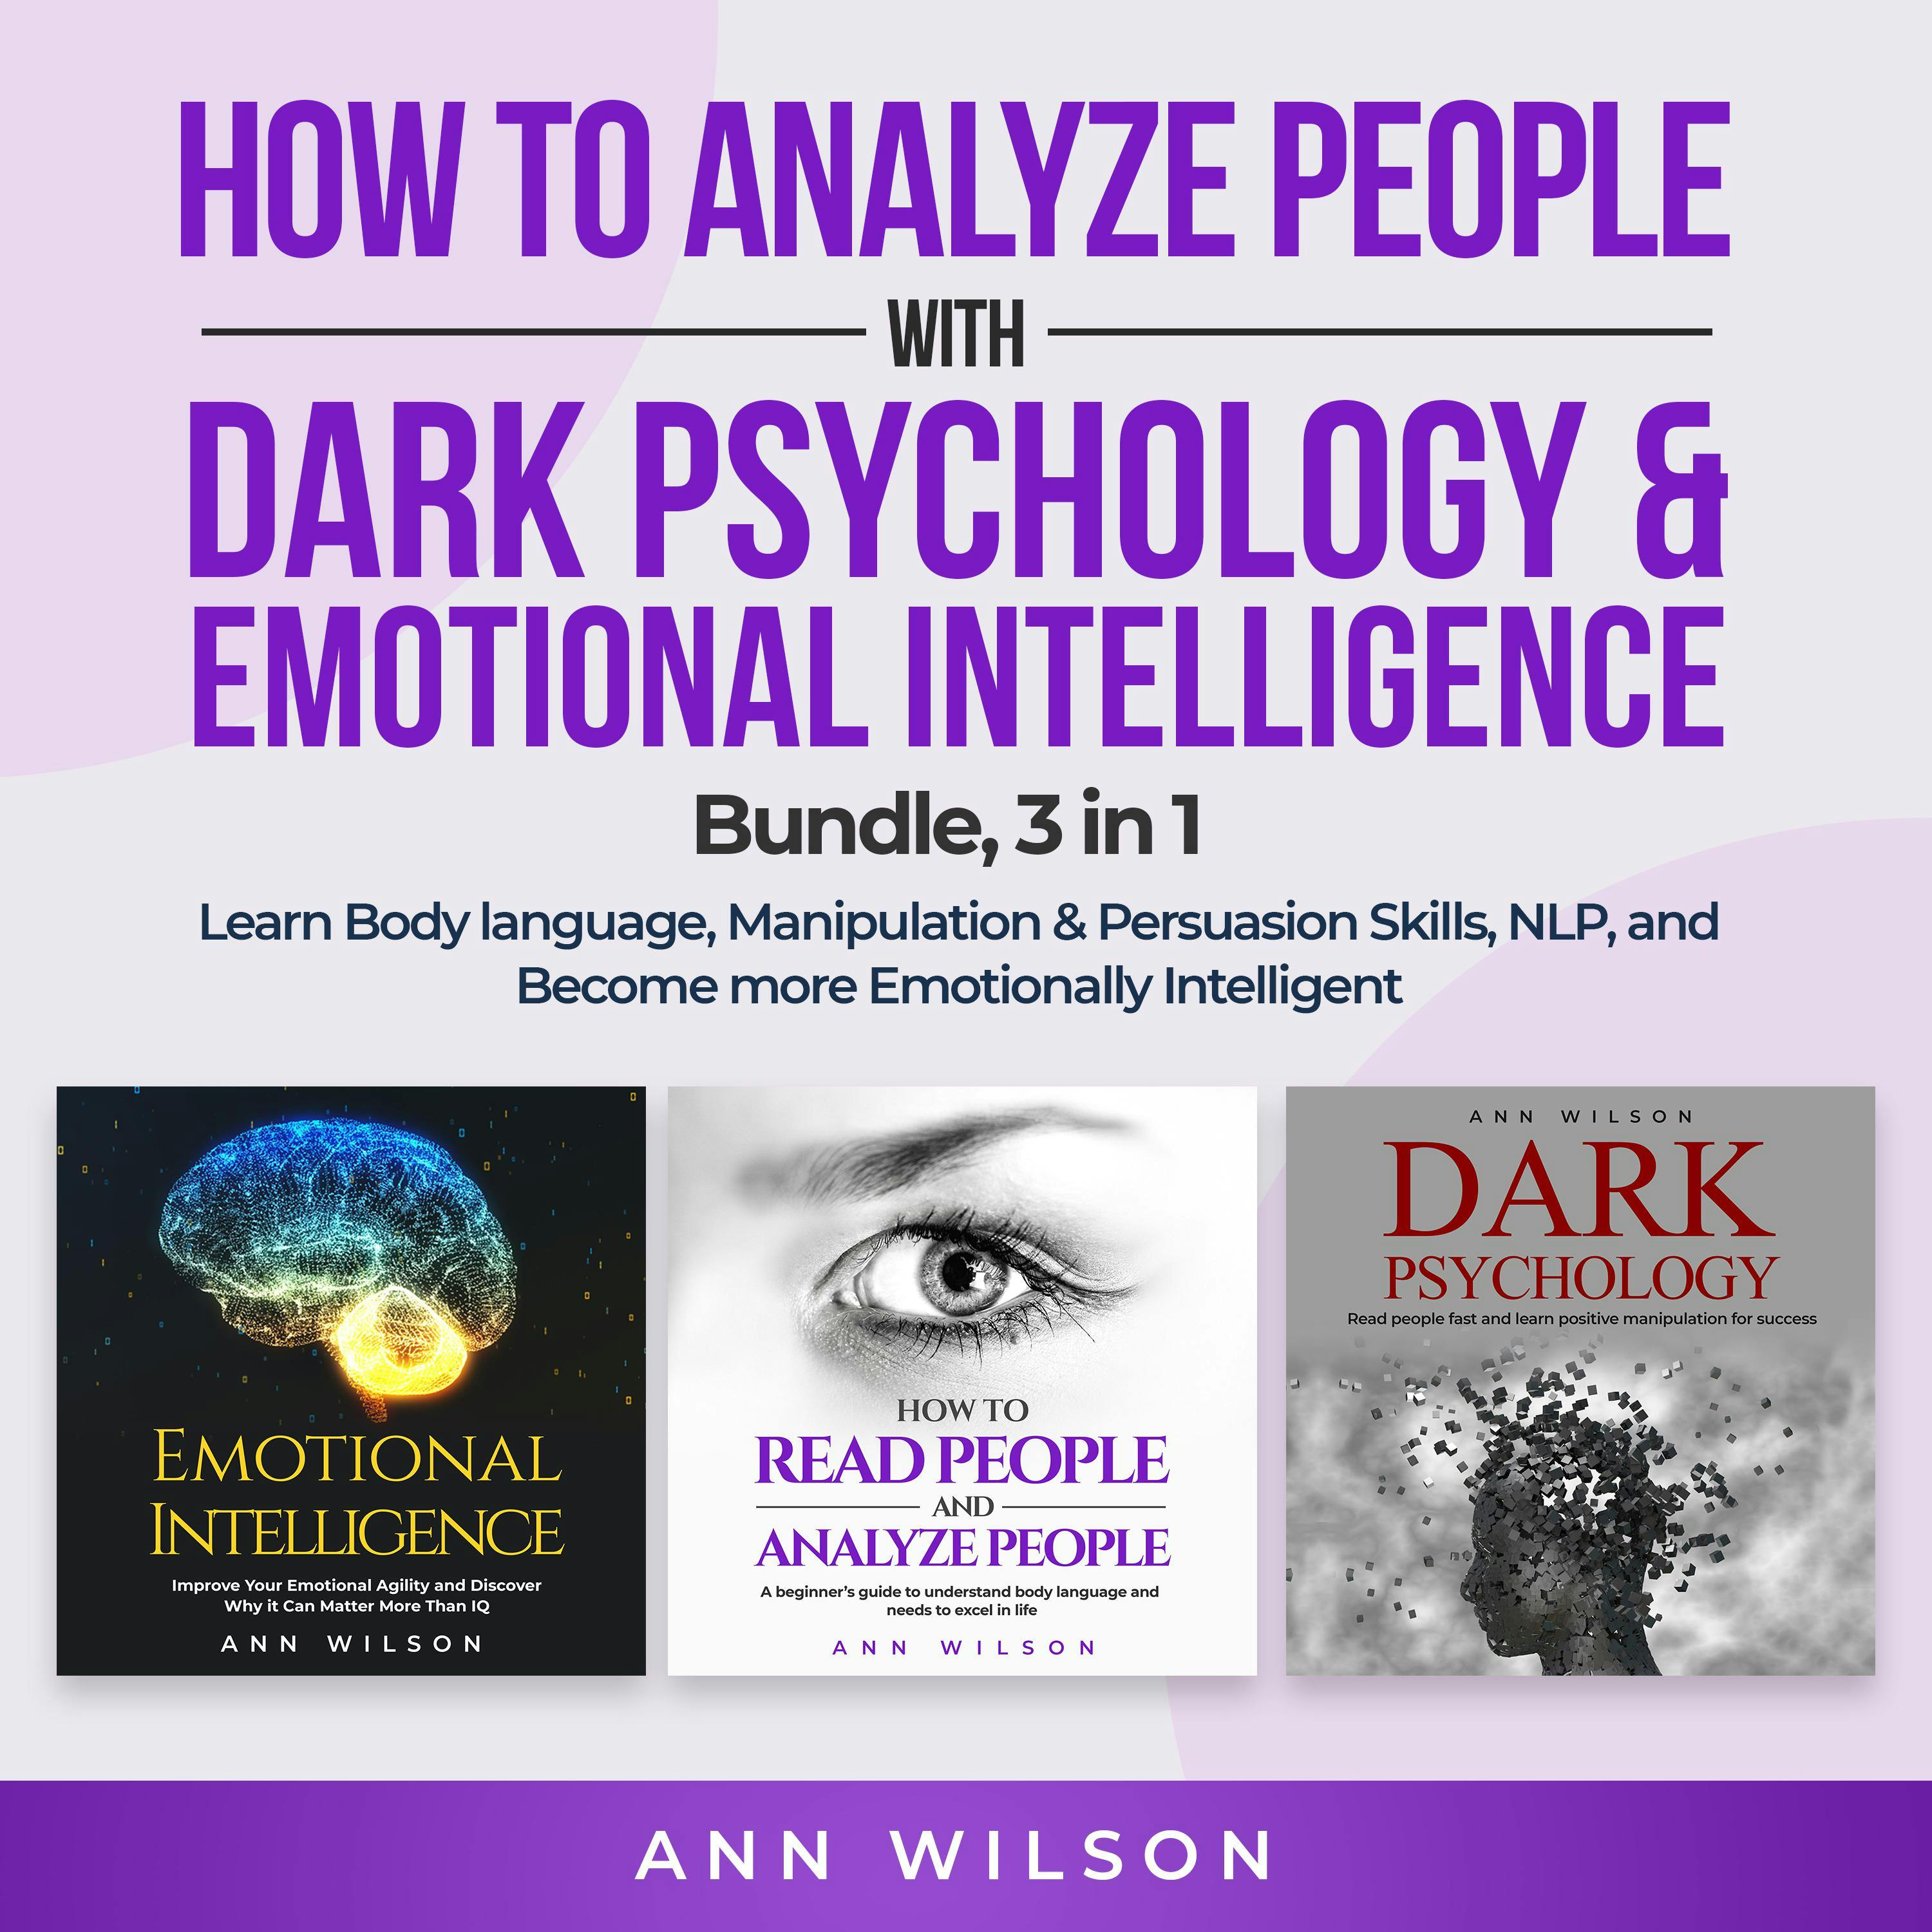 How to Analyze People with Dark Psychology & Emotional Intelligence Bundle, 3 in 1: Learn Body Language, Manipulation & Persuasion Skills, NLP and Become more Emotionally Intelligent - undefined